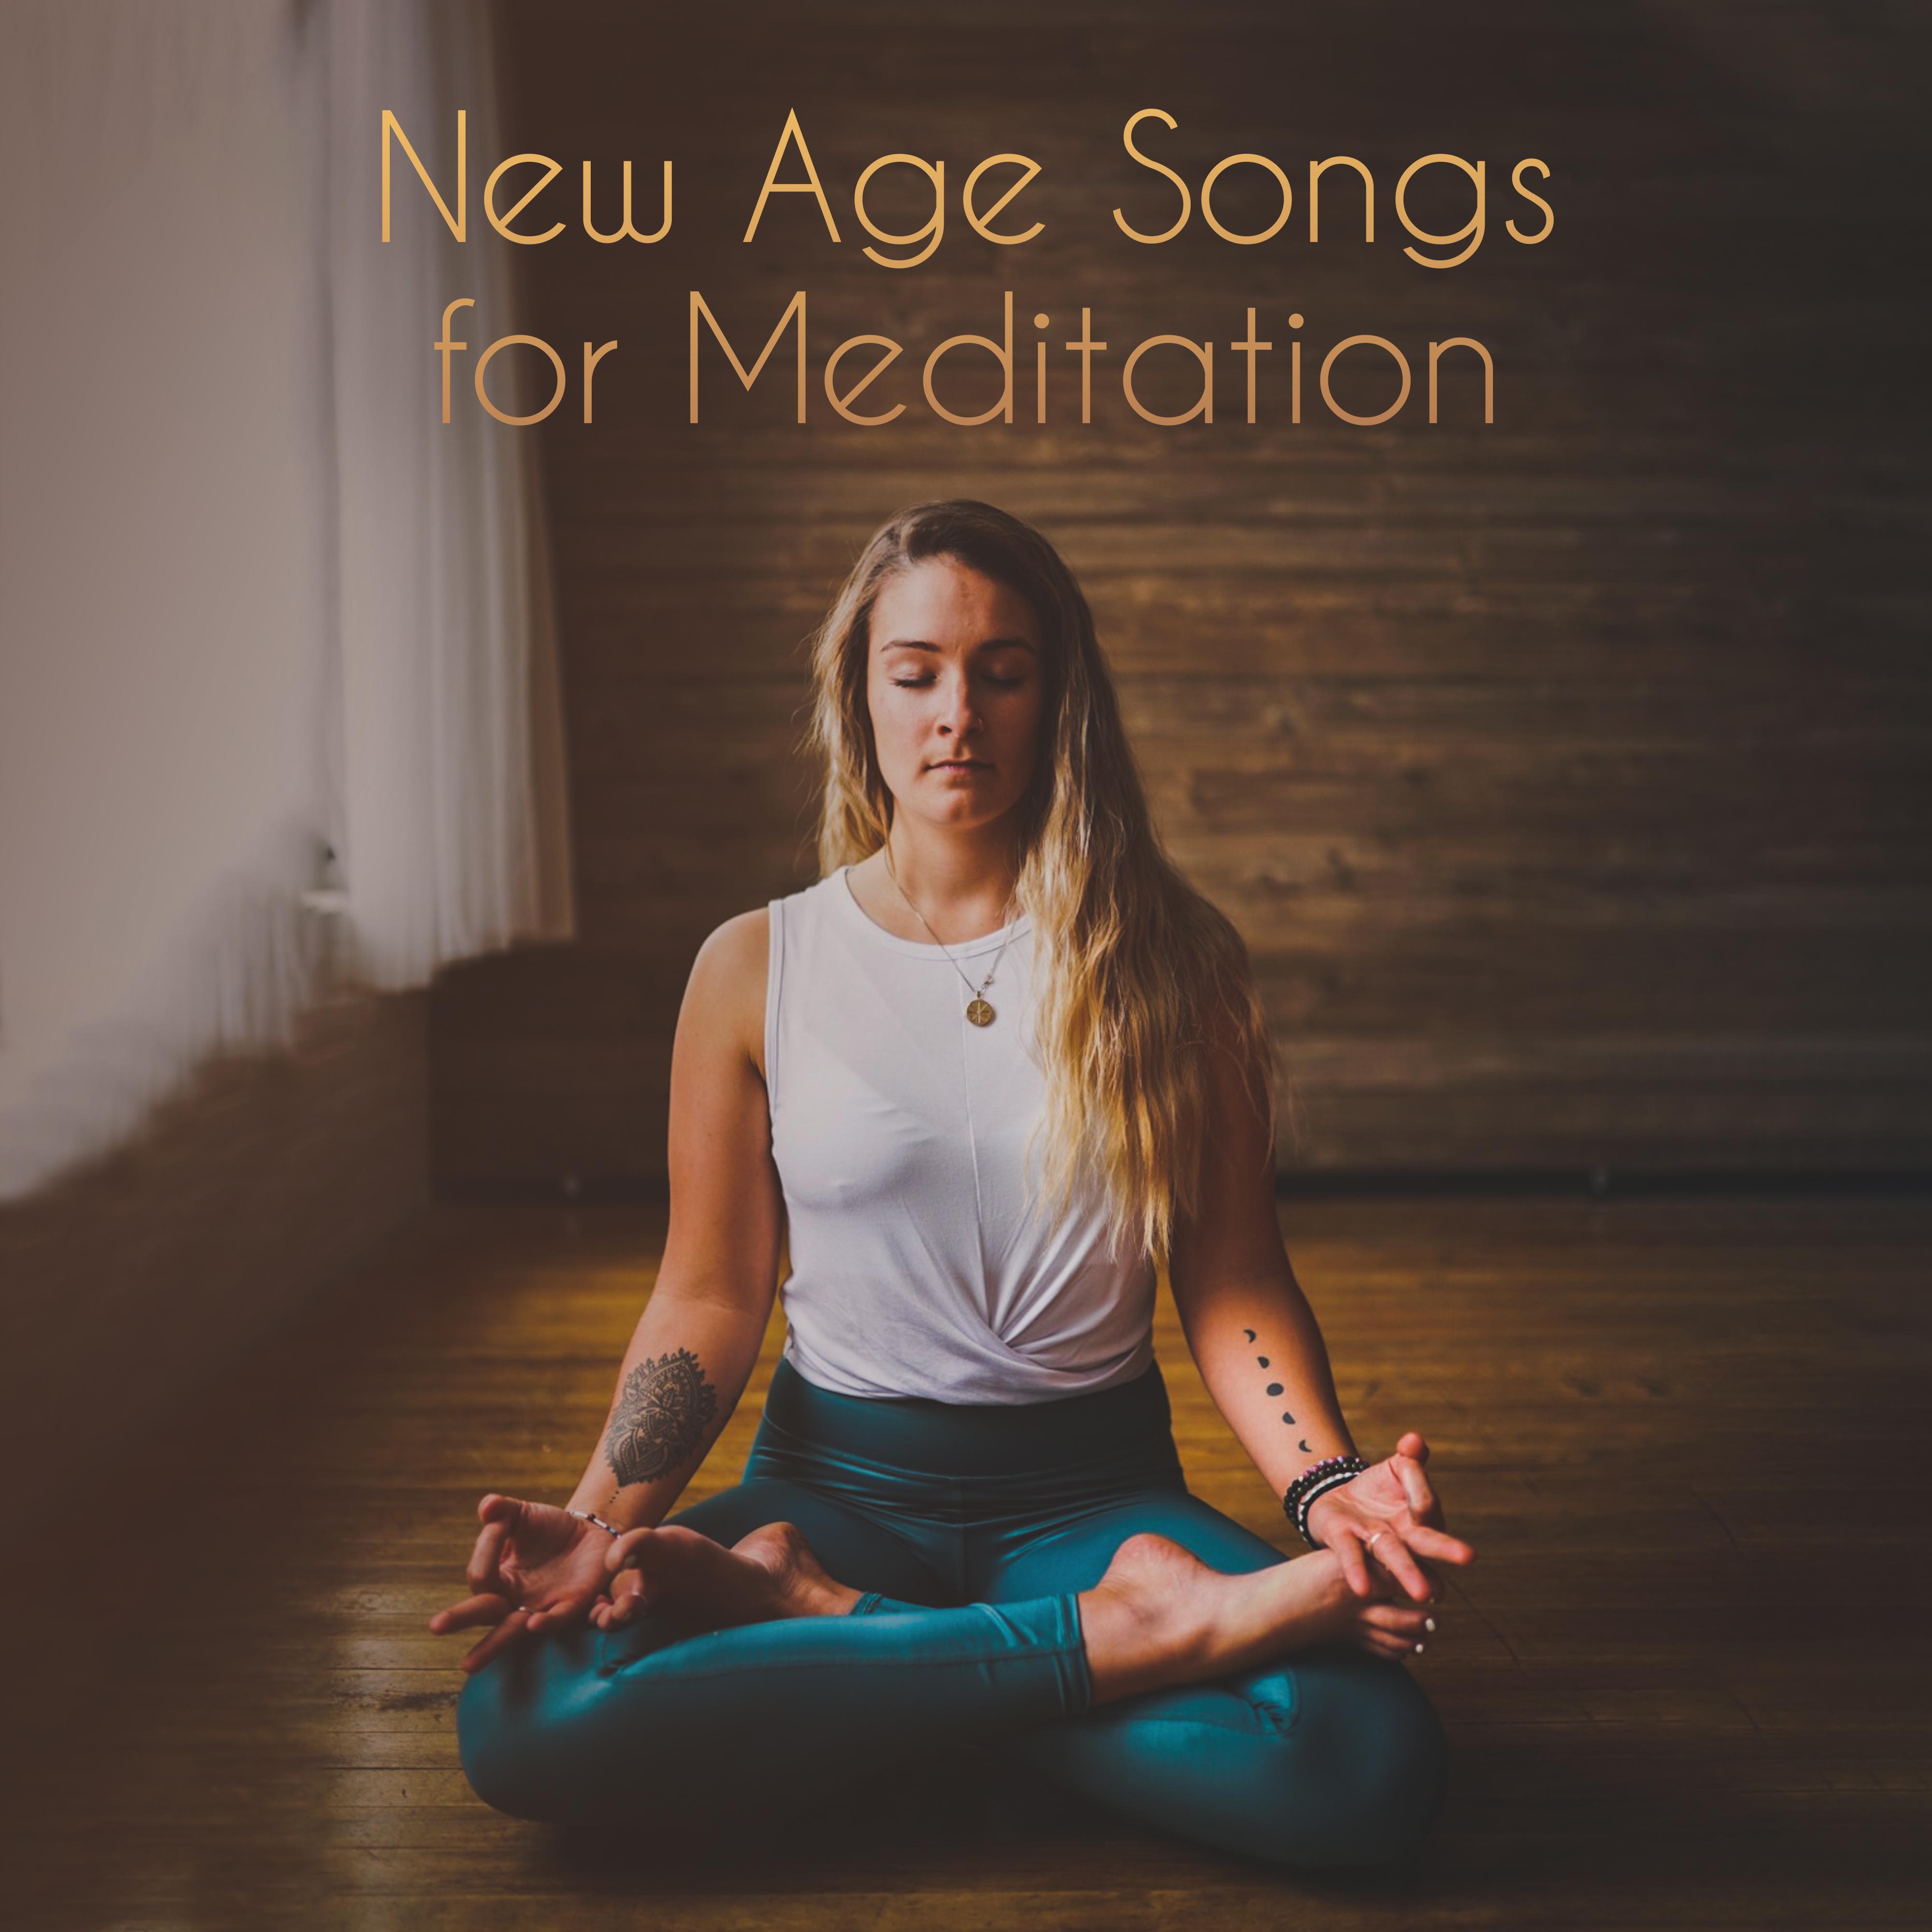 New Age Songs for Meditation – Yoga Music, Deep Harmony, Reduce Stress, Meditation Therapy, New Age Meditation Music, Harmony Yoga Music